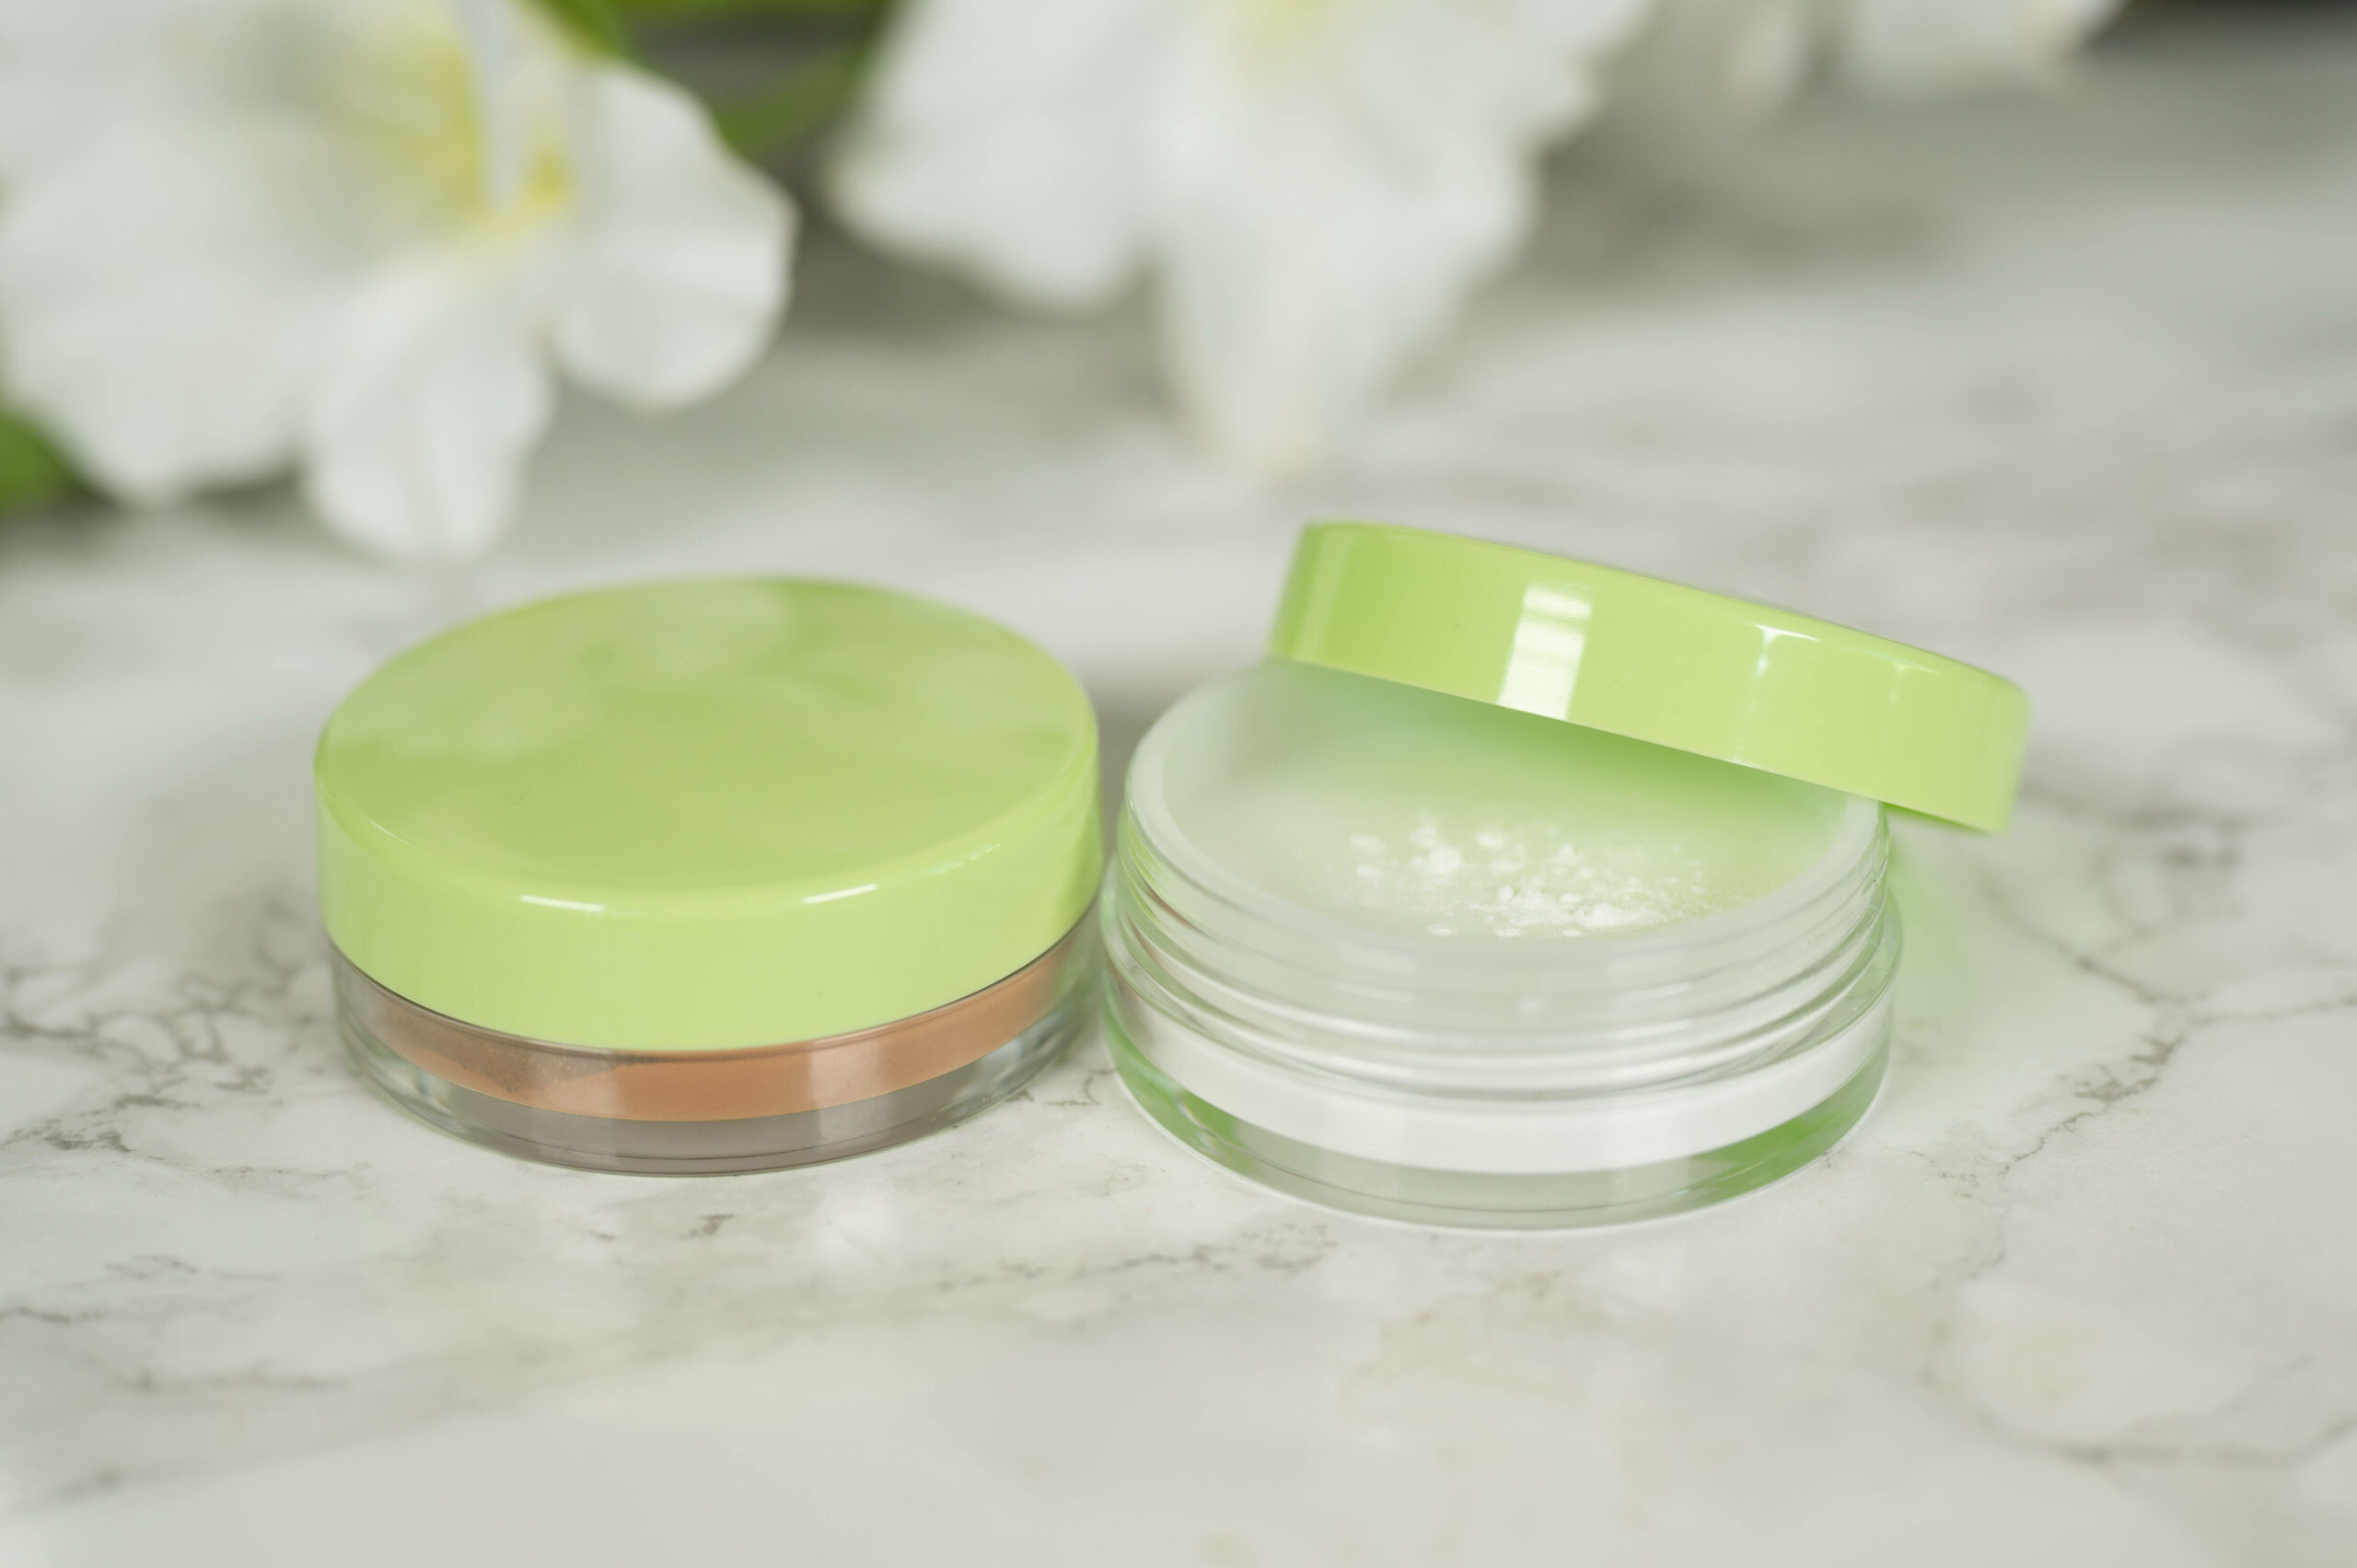 pixi Beauty H2O Skin Veil Powder in Translucent and Sunkissed Review